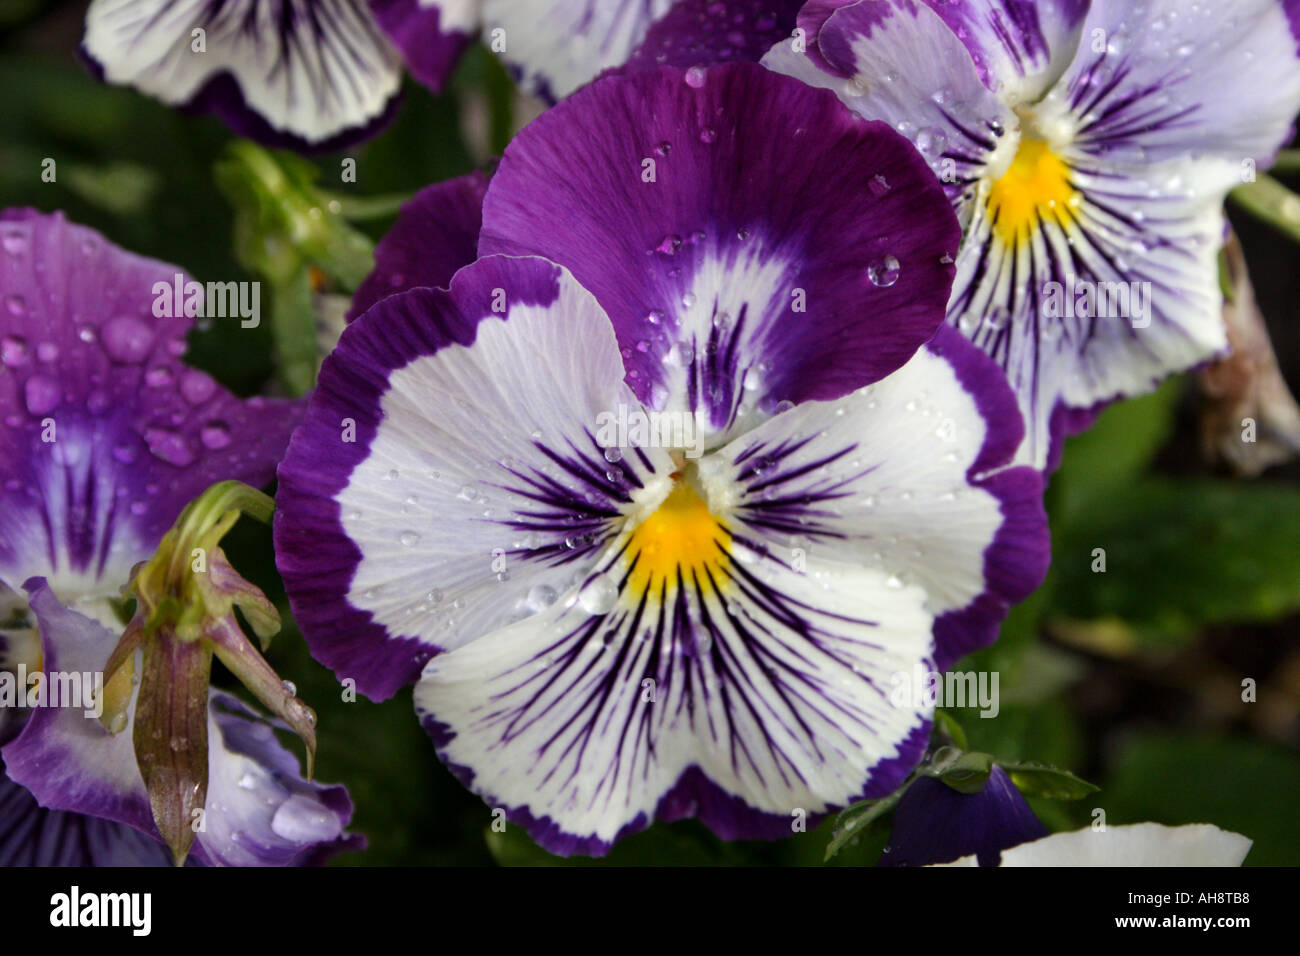 A PURPLE AND WHITE PANSY BAPD 2682 Stock Photo